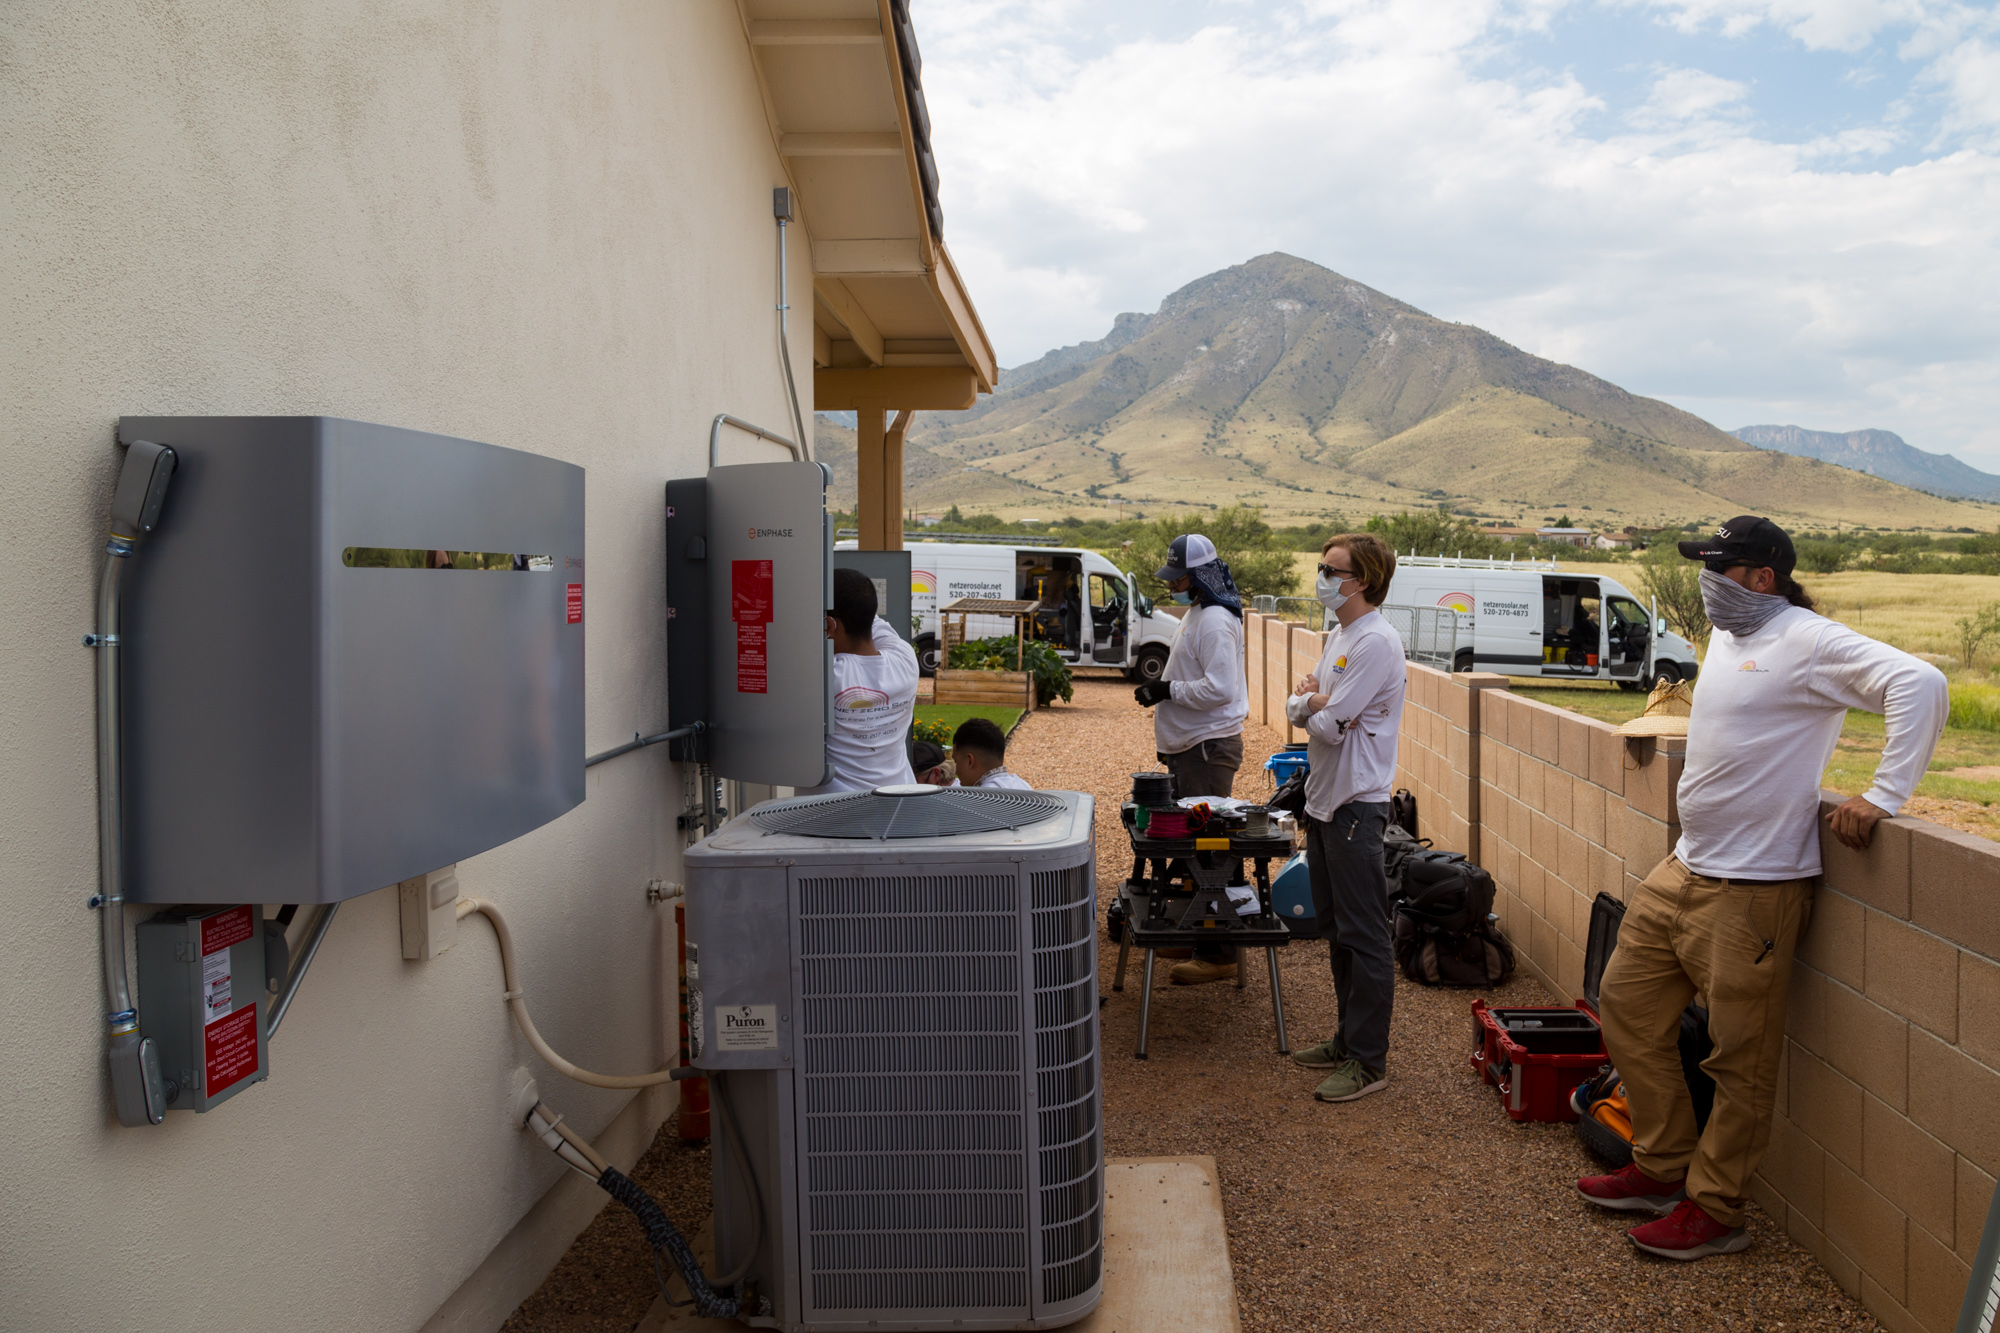 One of our crews installing a battery backup system using products from Enphase Energy in Hereford, Arizona